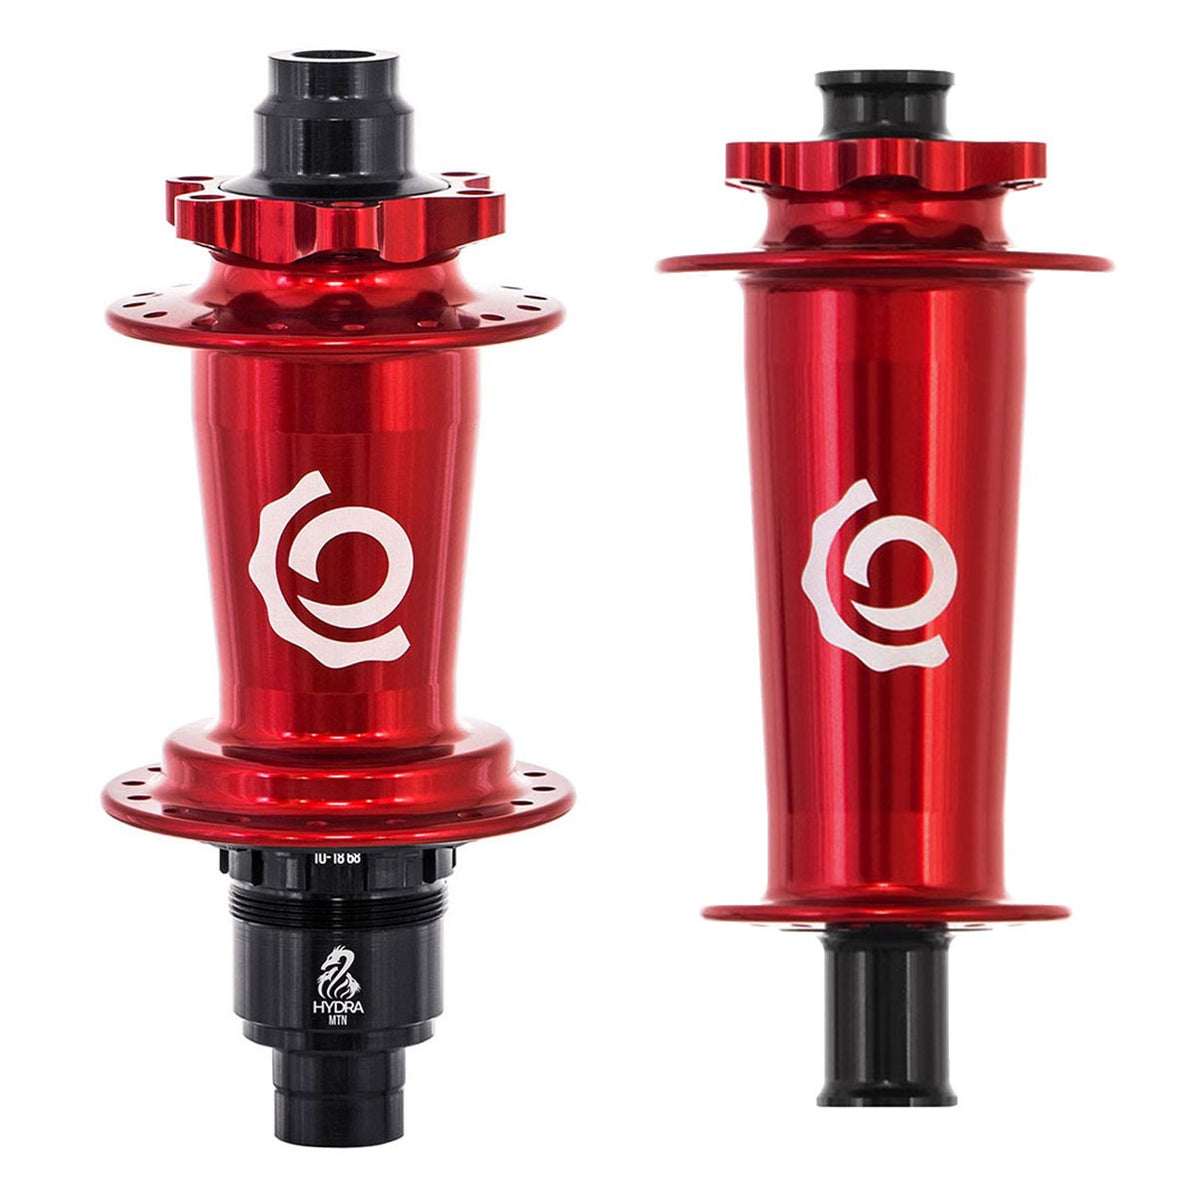 Industry Nine Hydra Classic 32h 6 Bolt Red Hubset